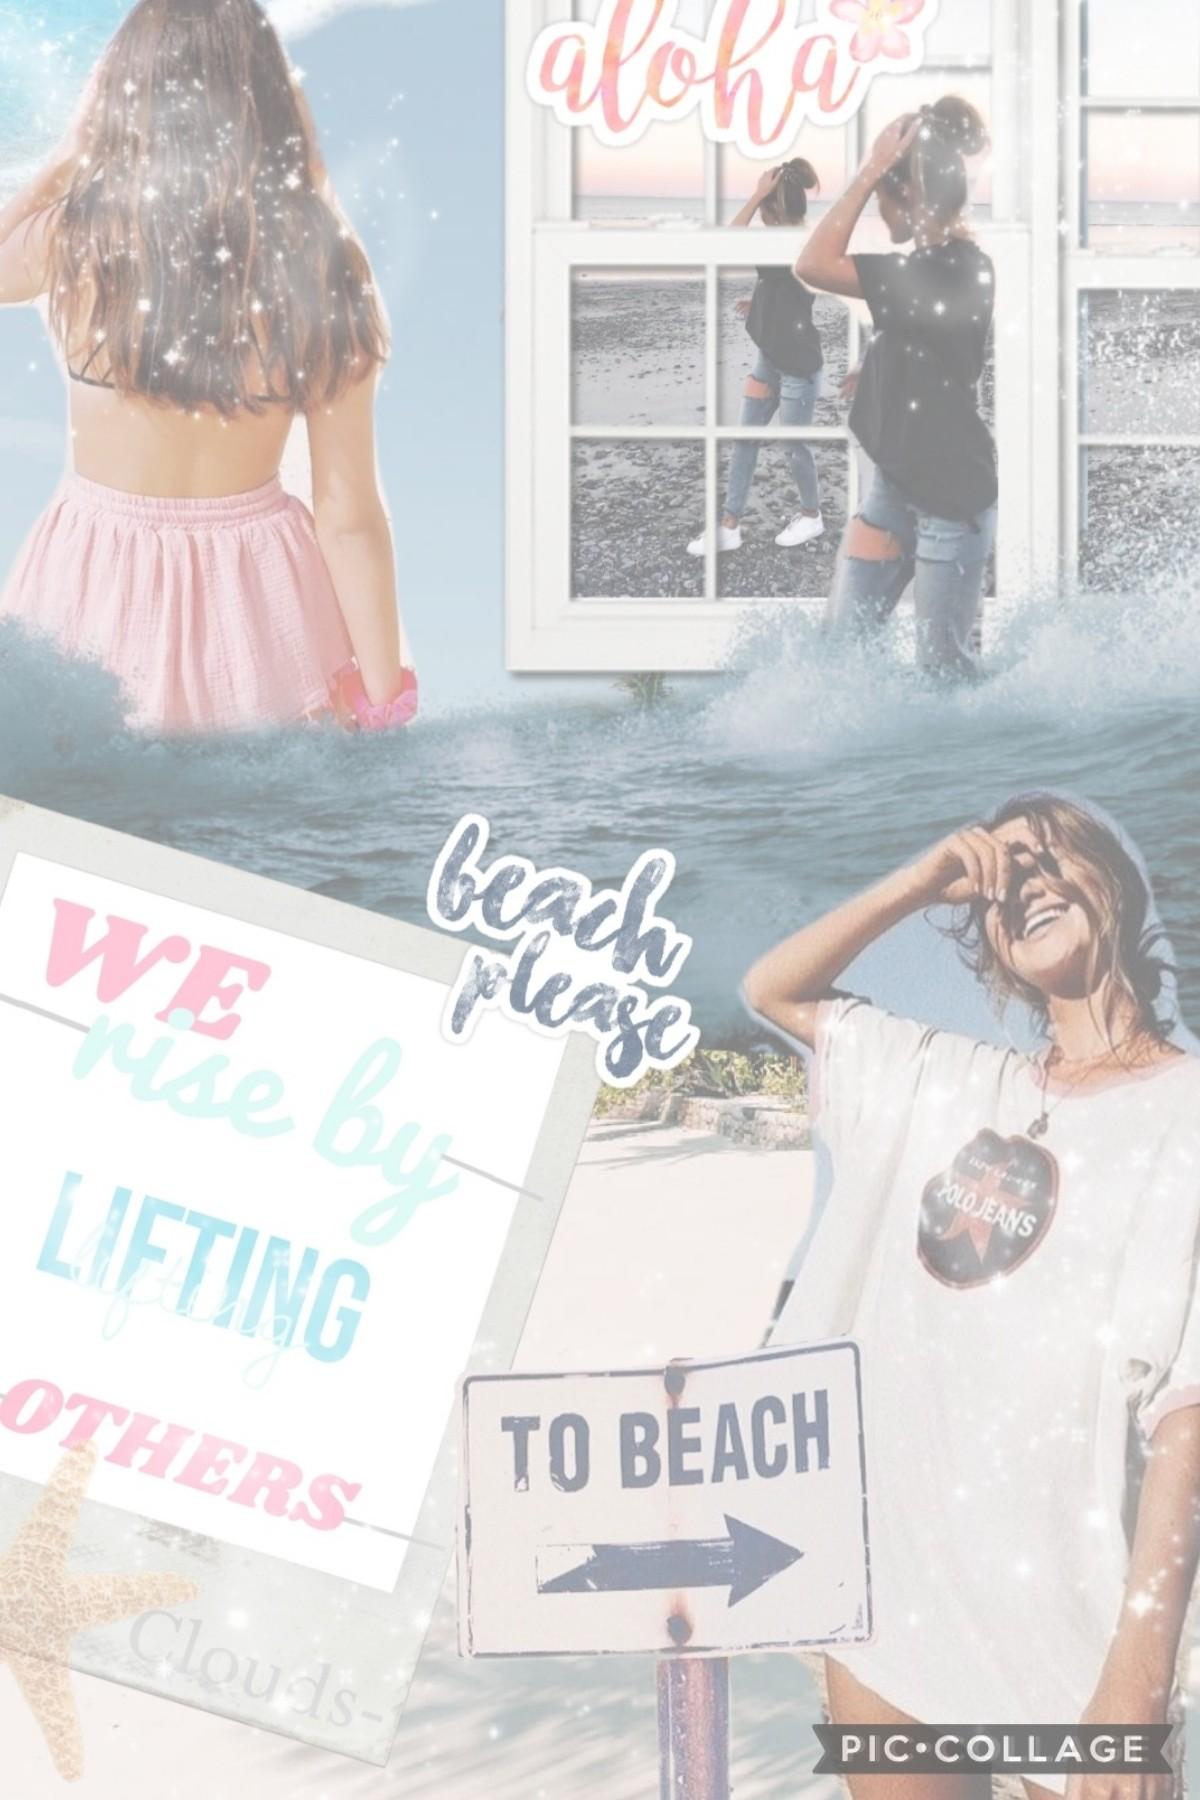            💕tap💕

   heyy! so I'm so sry for not posting yesterday and being inactive the day before that 😔❤️
  hru all? 💓
 I'm not quitting preppy, just got kinda bored and wanted to make a beachy collage 💞 love how it turned out 🤩
  QOTD: How often do y